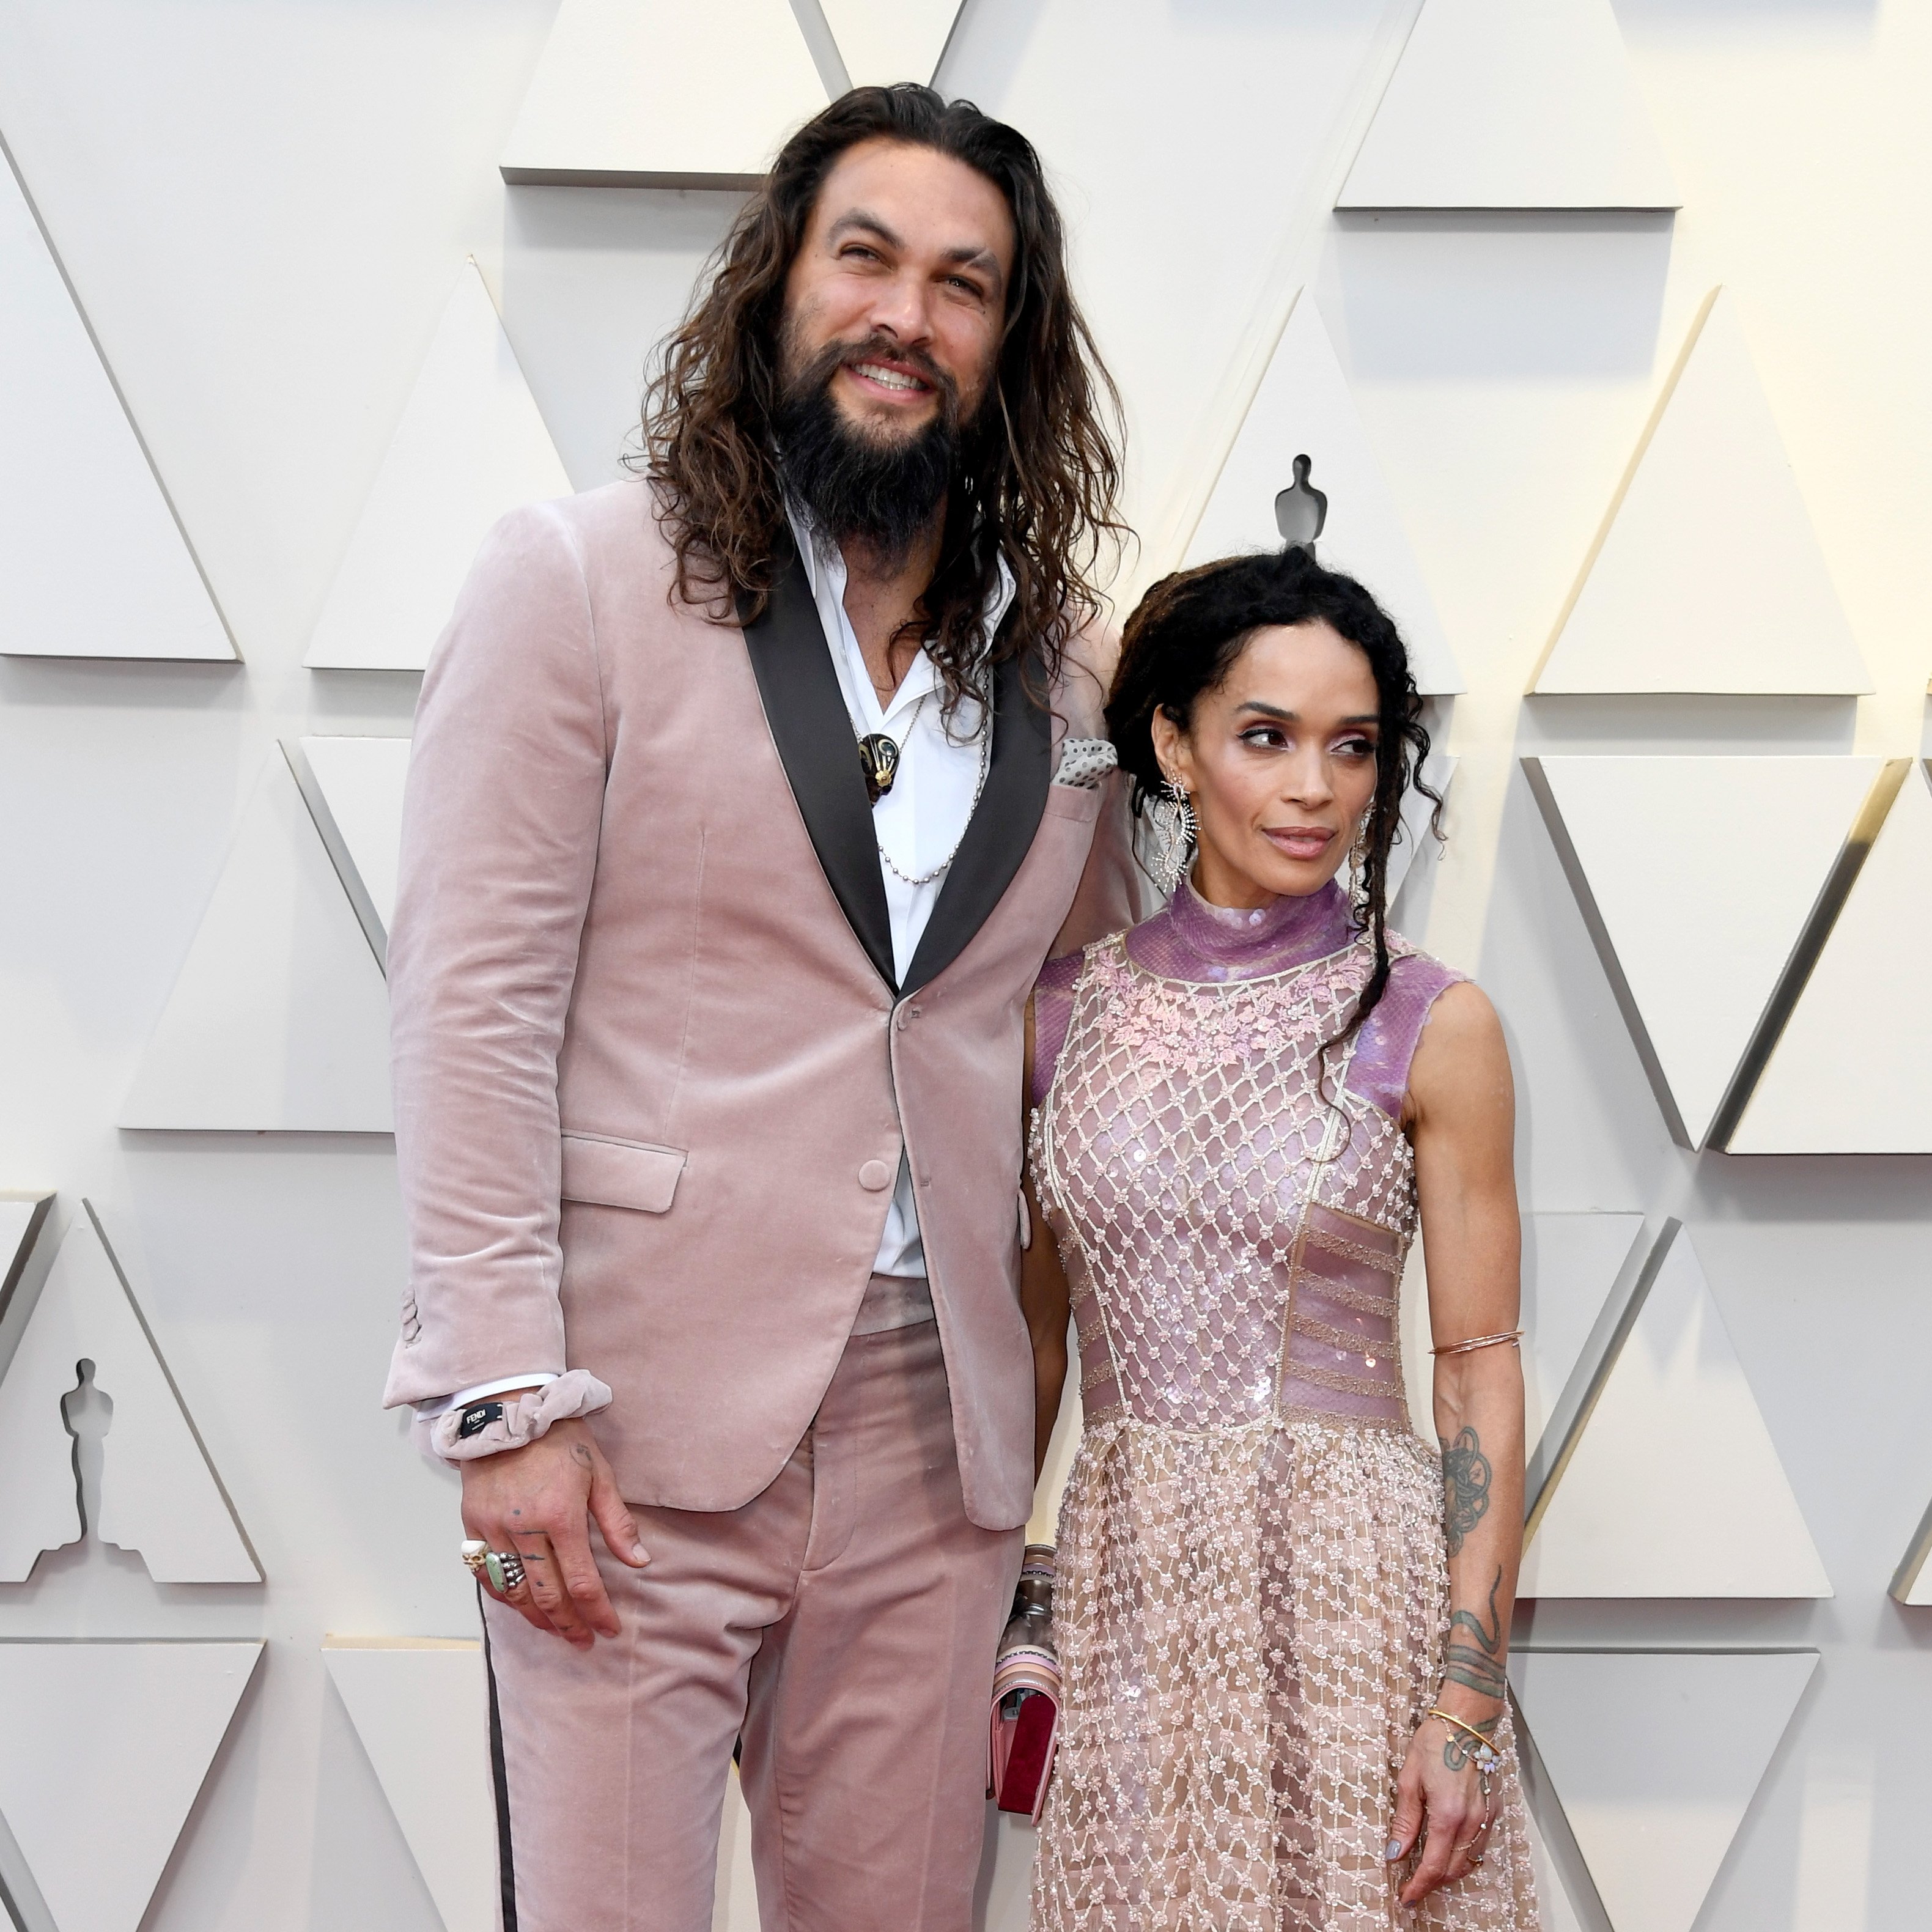 Jason Momoa and wife Lisa Bonet attend the 2019 Oscars | Photo: Getty Images